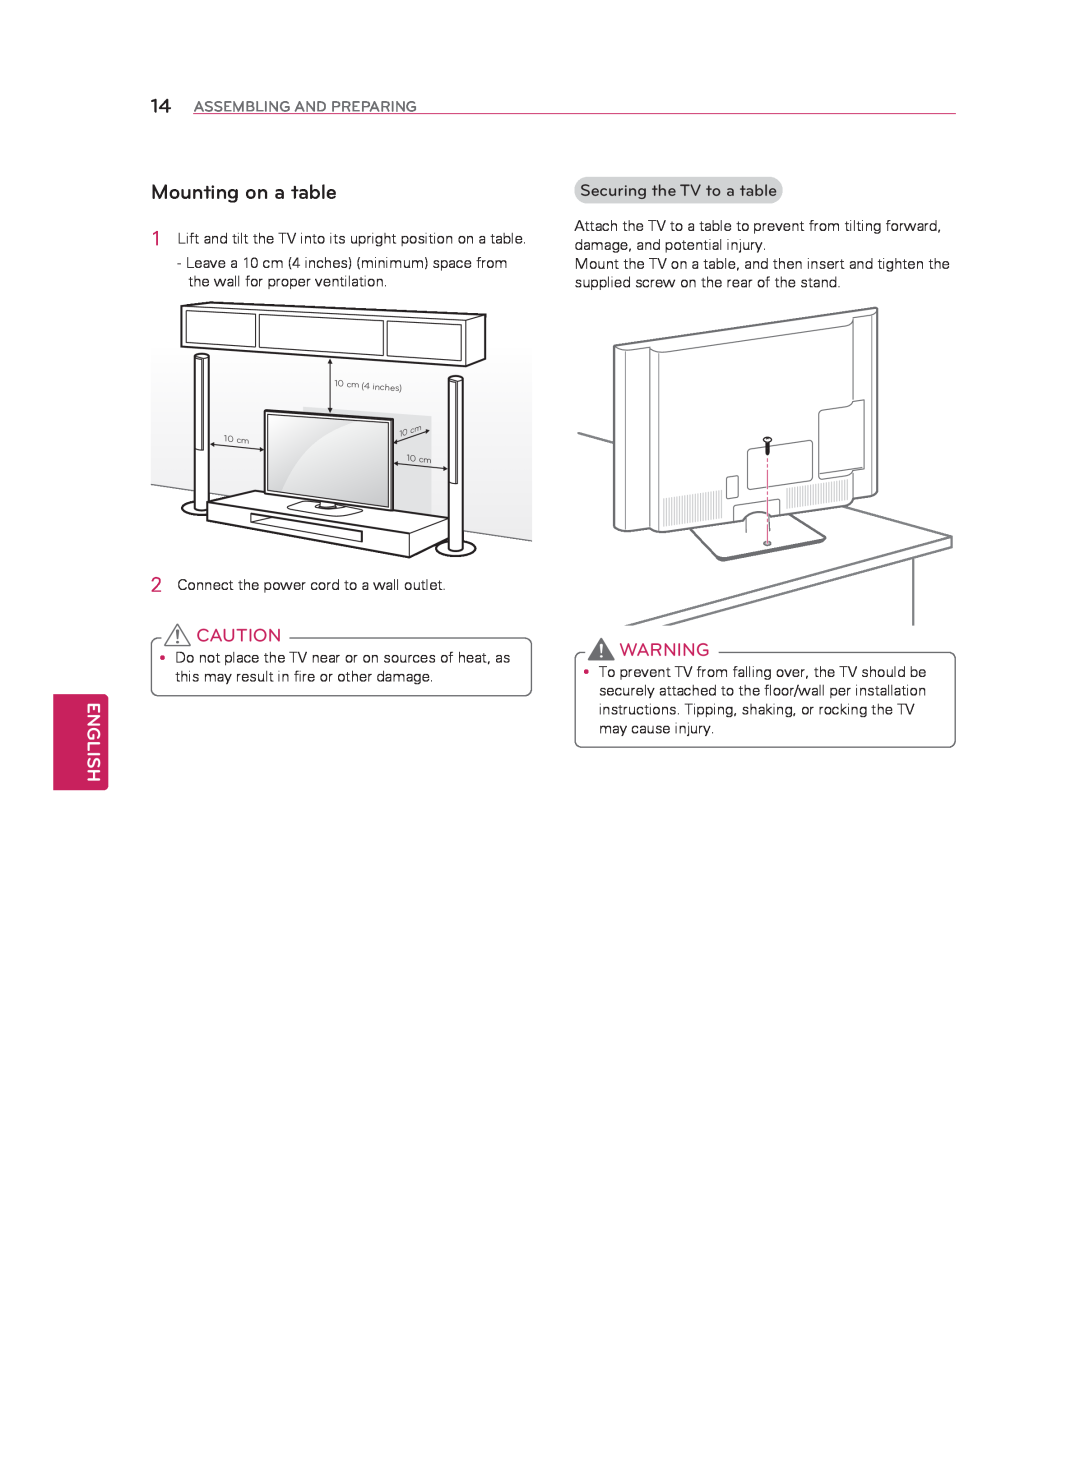 LG Electronics 60LN5400 owner manual Mounting on a table, English, Securing the TV to a table, Assembling And Preparing 